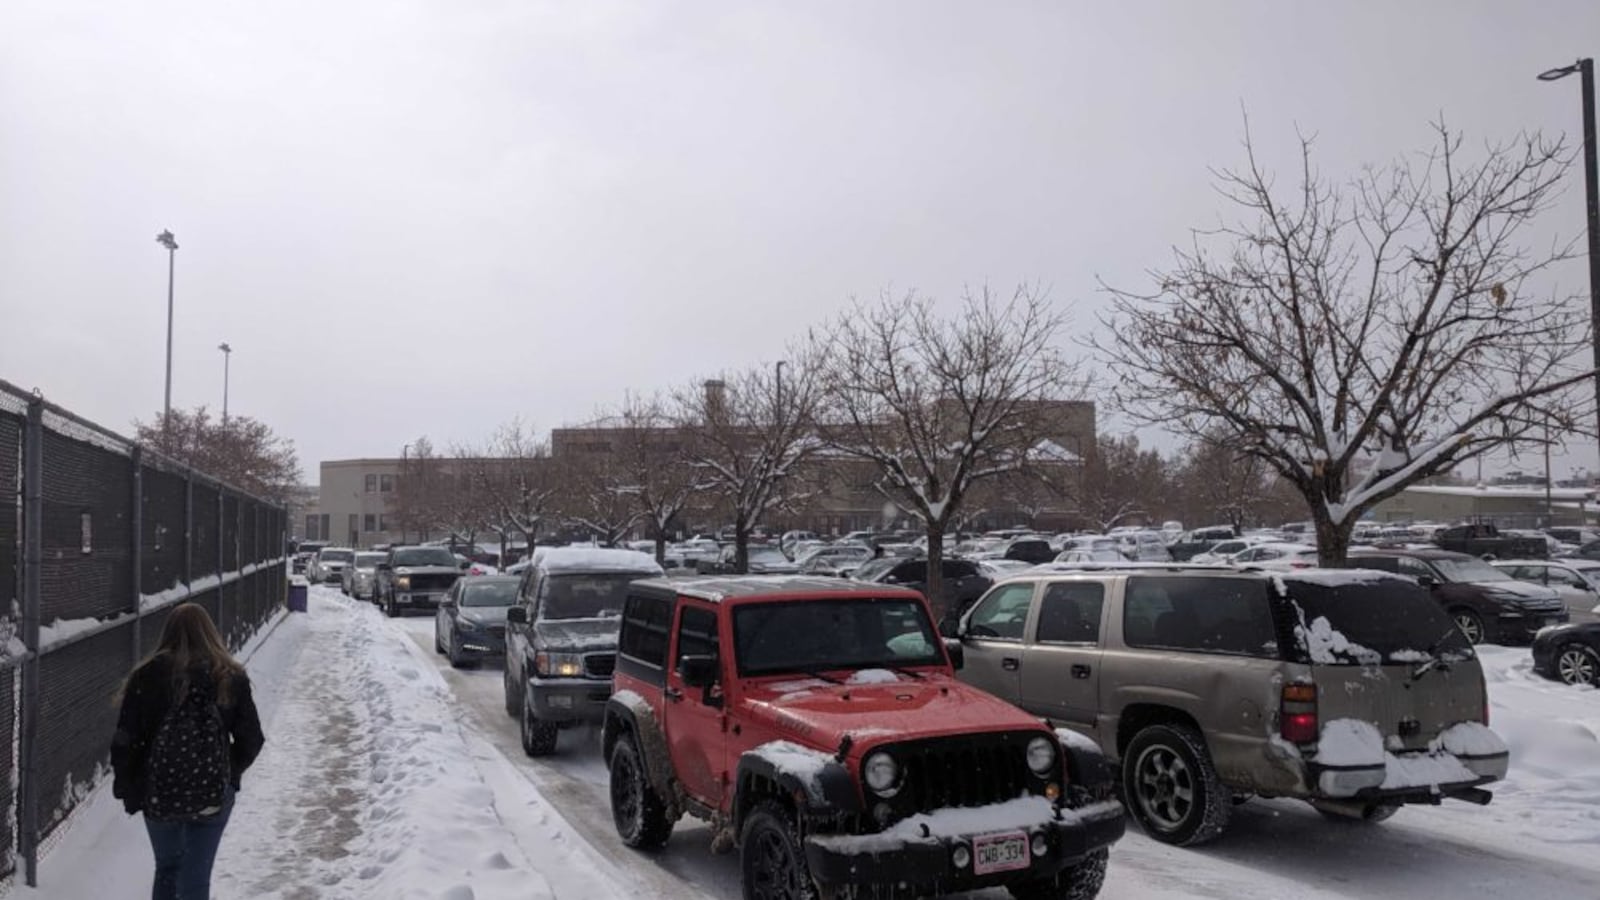 Teachers and students leave North High School after Denver Public Schools calls an early dismissal Oct. 29, 2019.